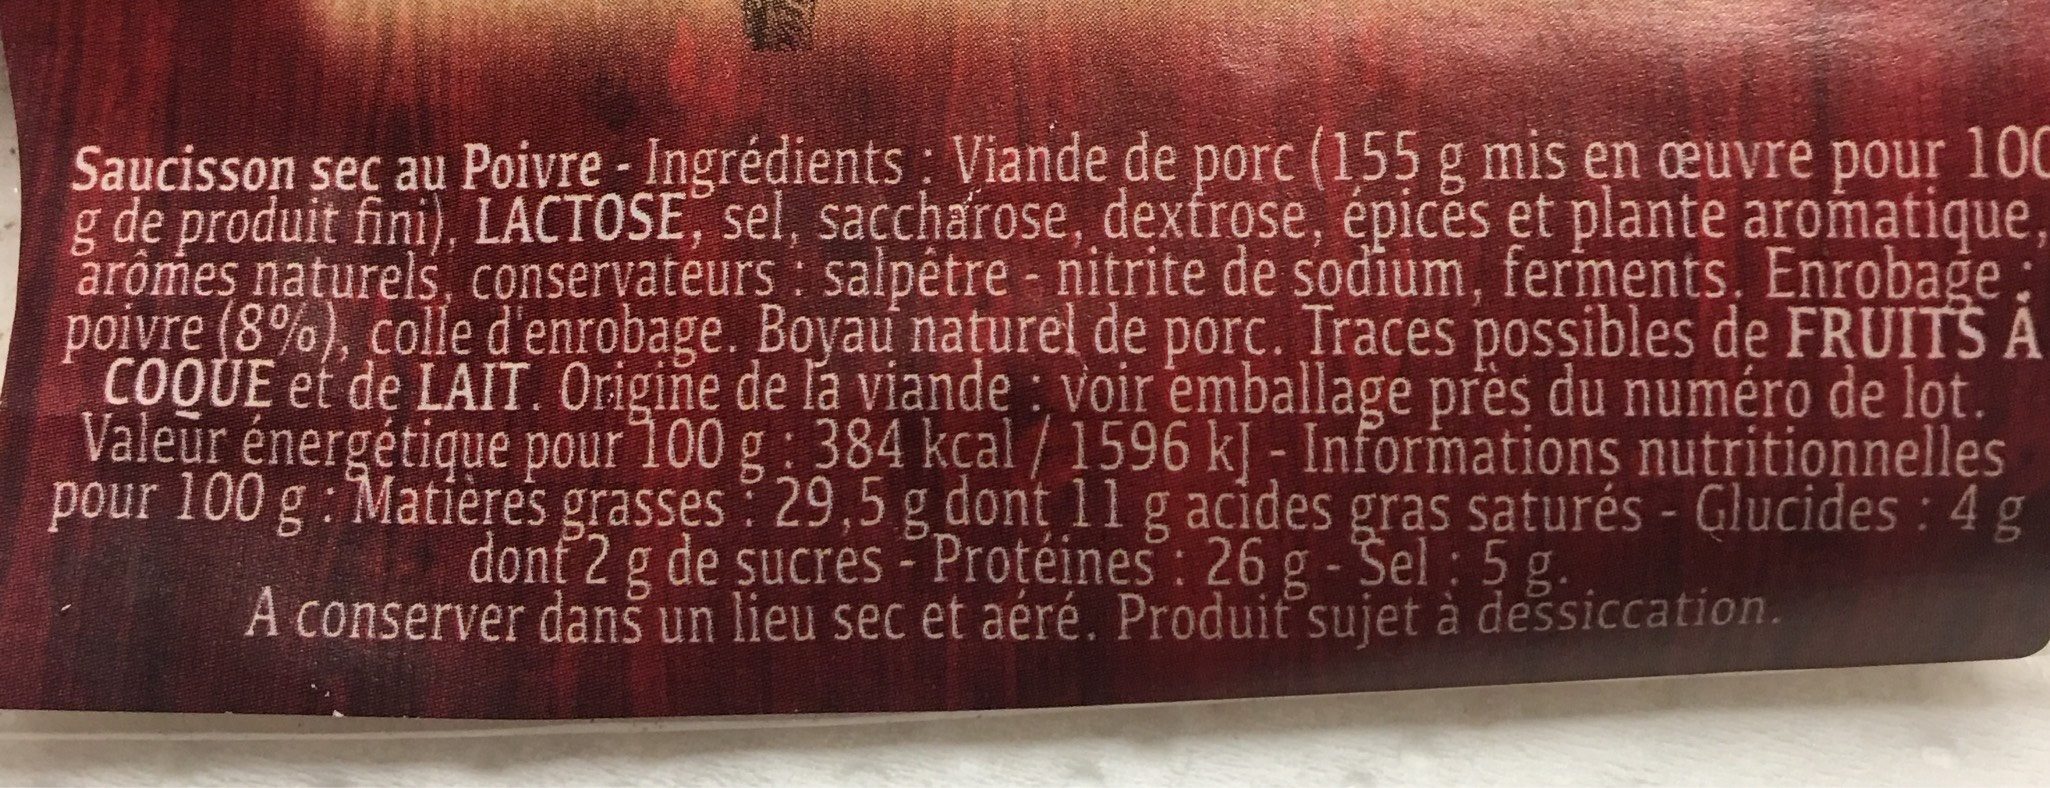 Pur Porc Met Peper - Nutrition facts - fr